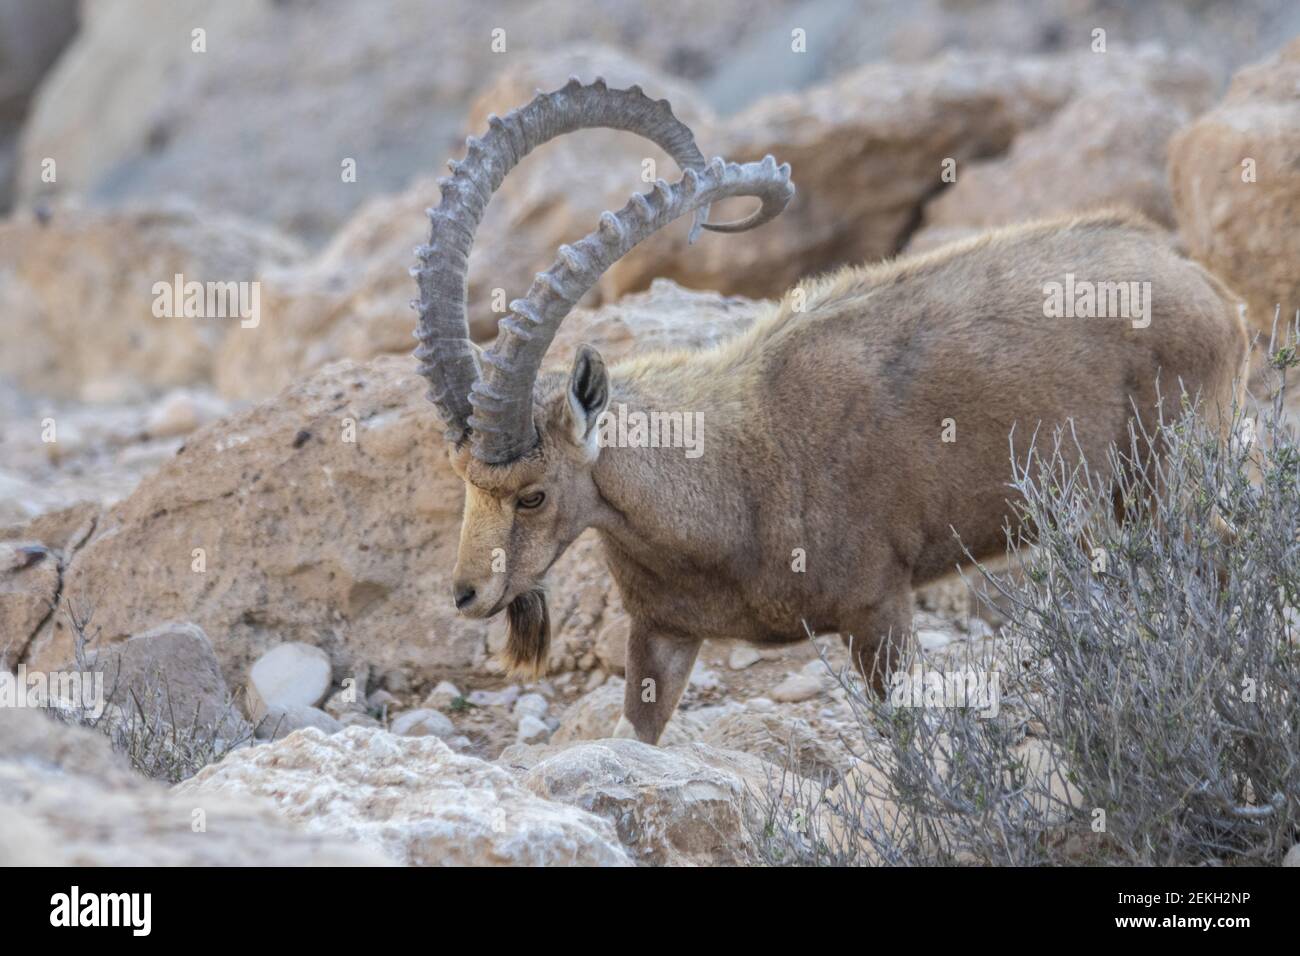 The Nubian ibex (Capra nubiana) is a desert-dwelling goat species found in mountainous areas of northern and northeast Africa, and the Middle East. Stock Photo